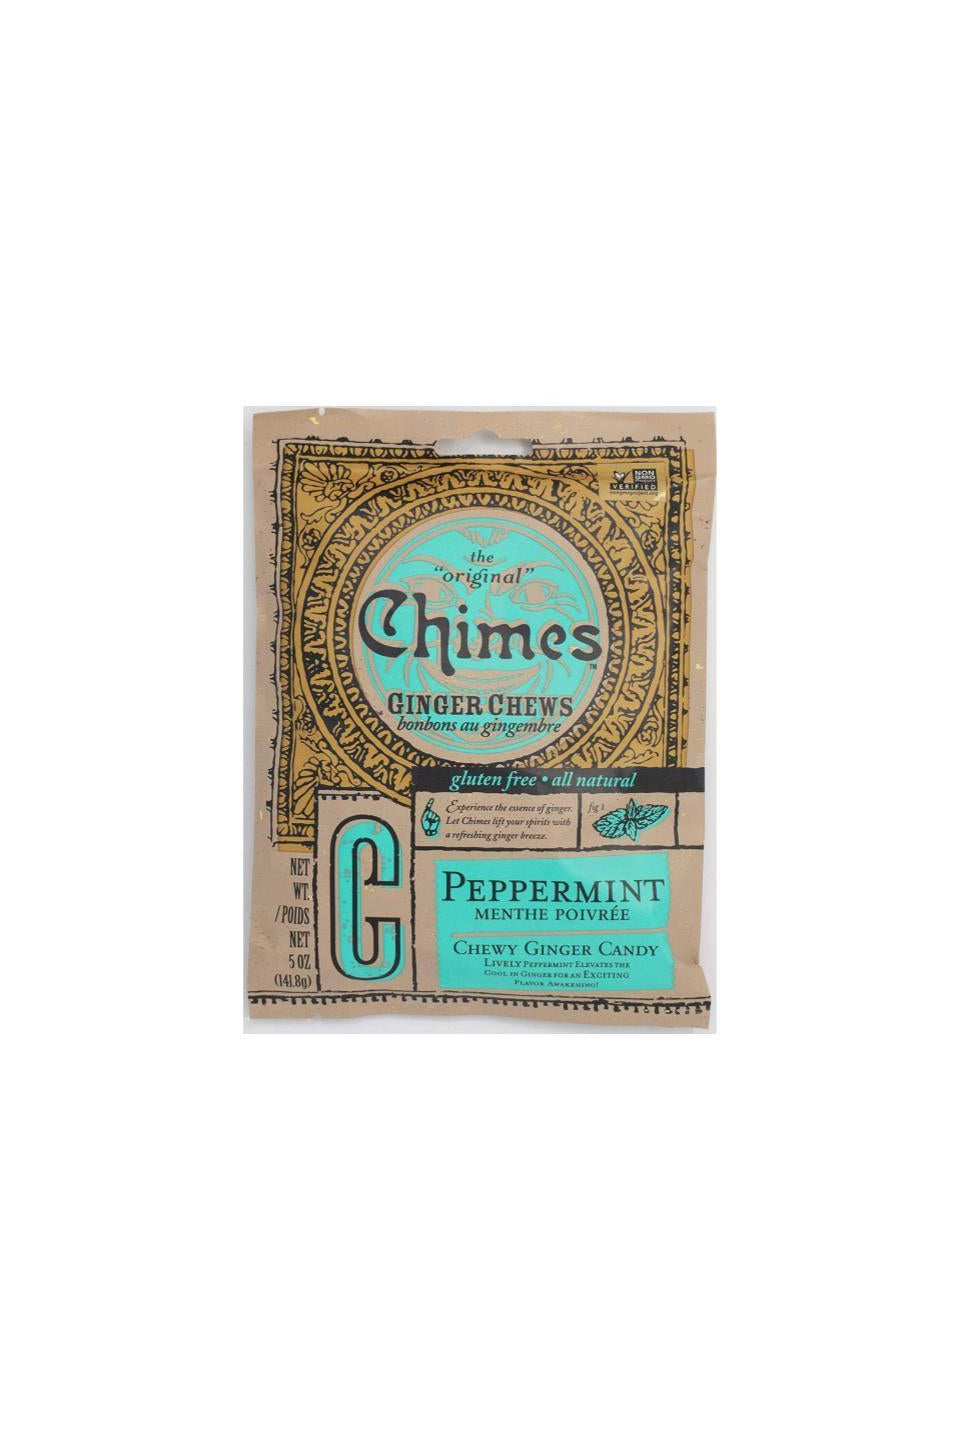 Chimes Peppermint Ginger Chews 141.8g